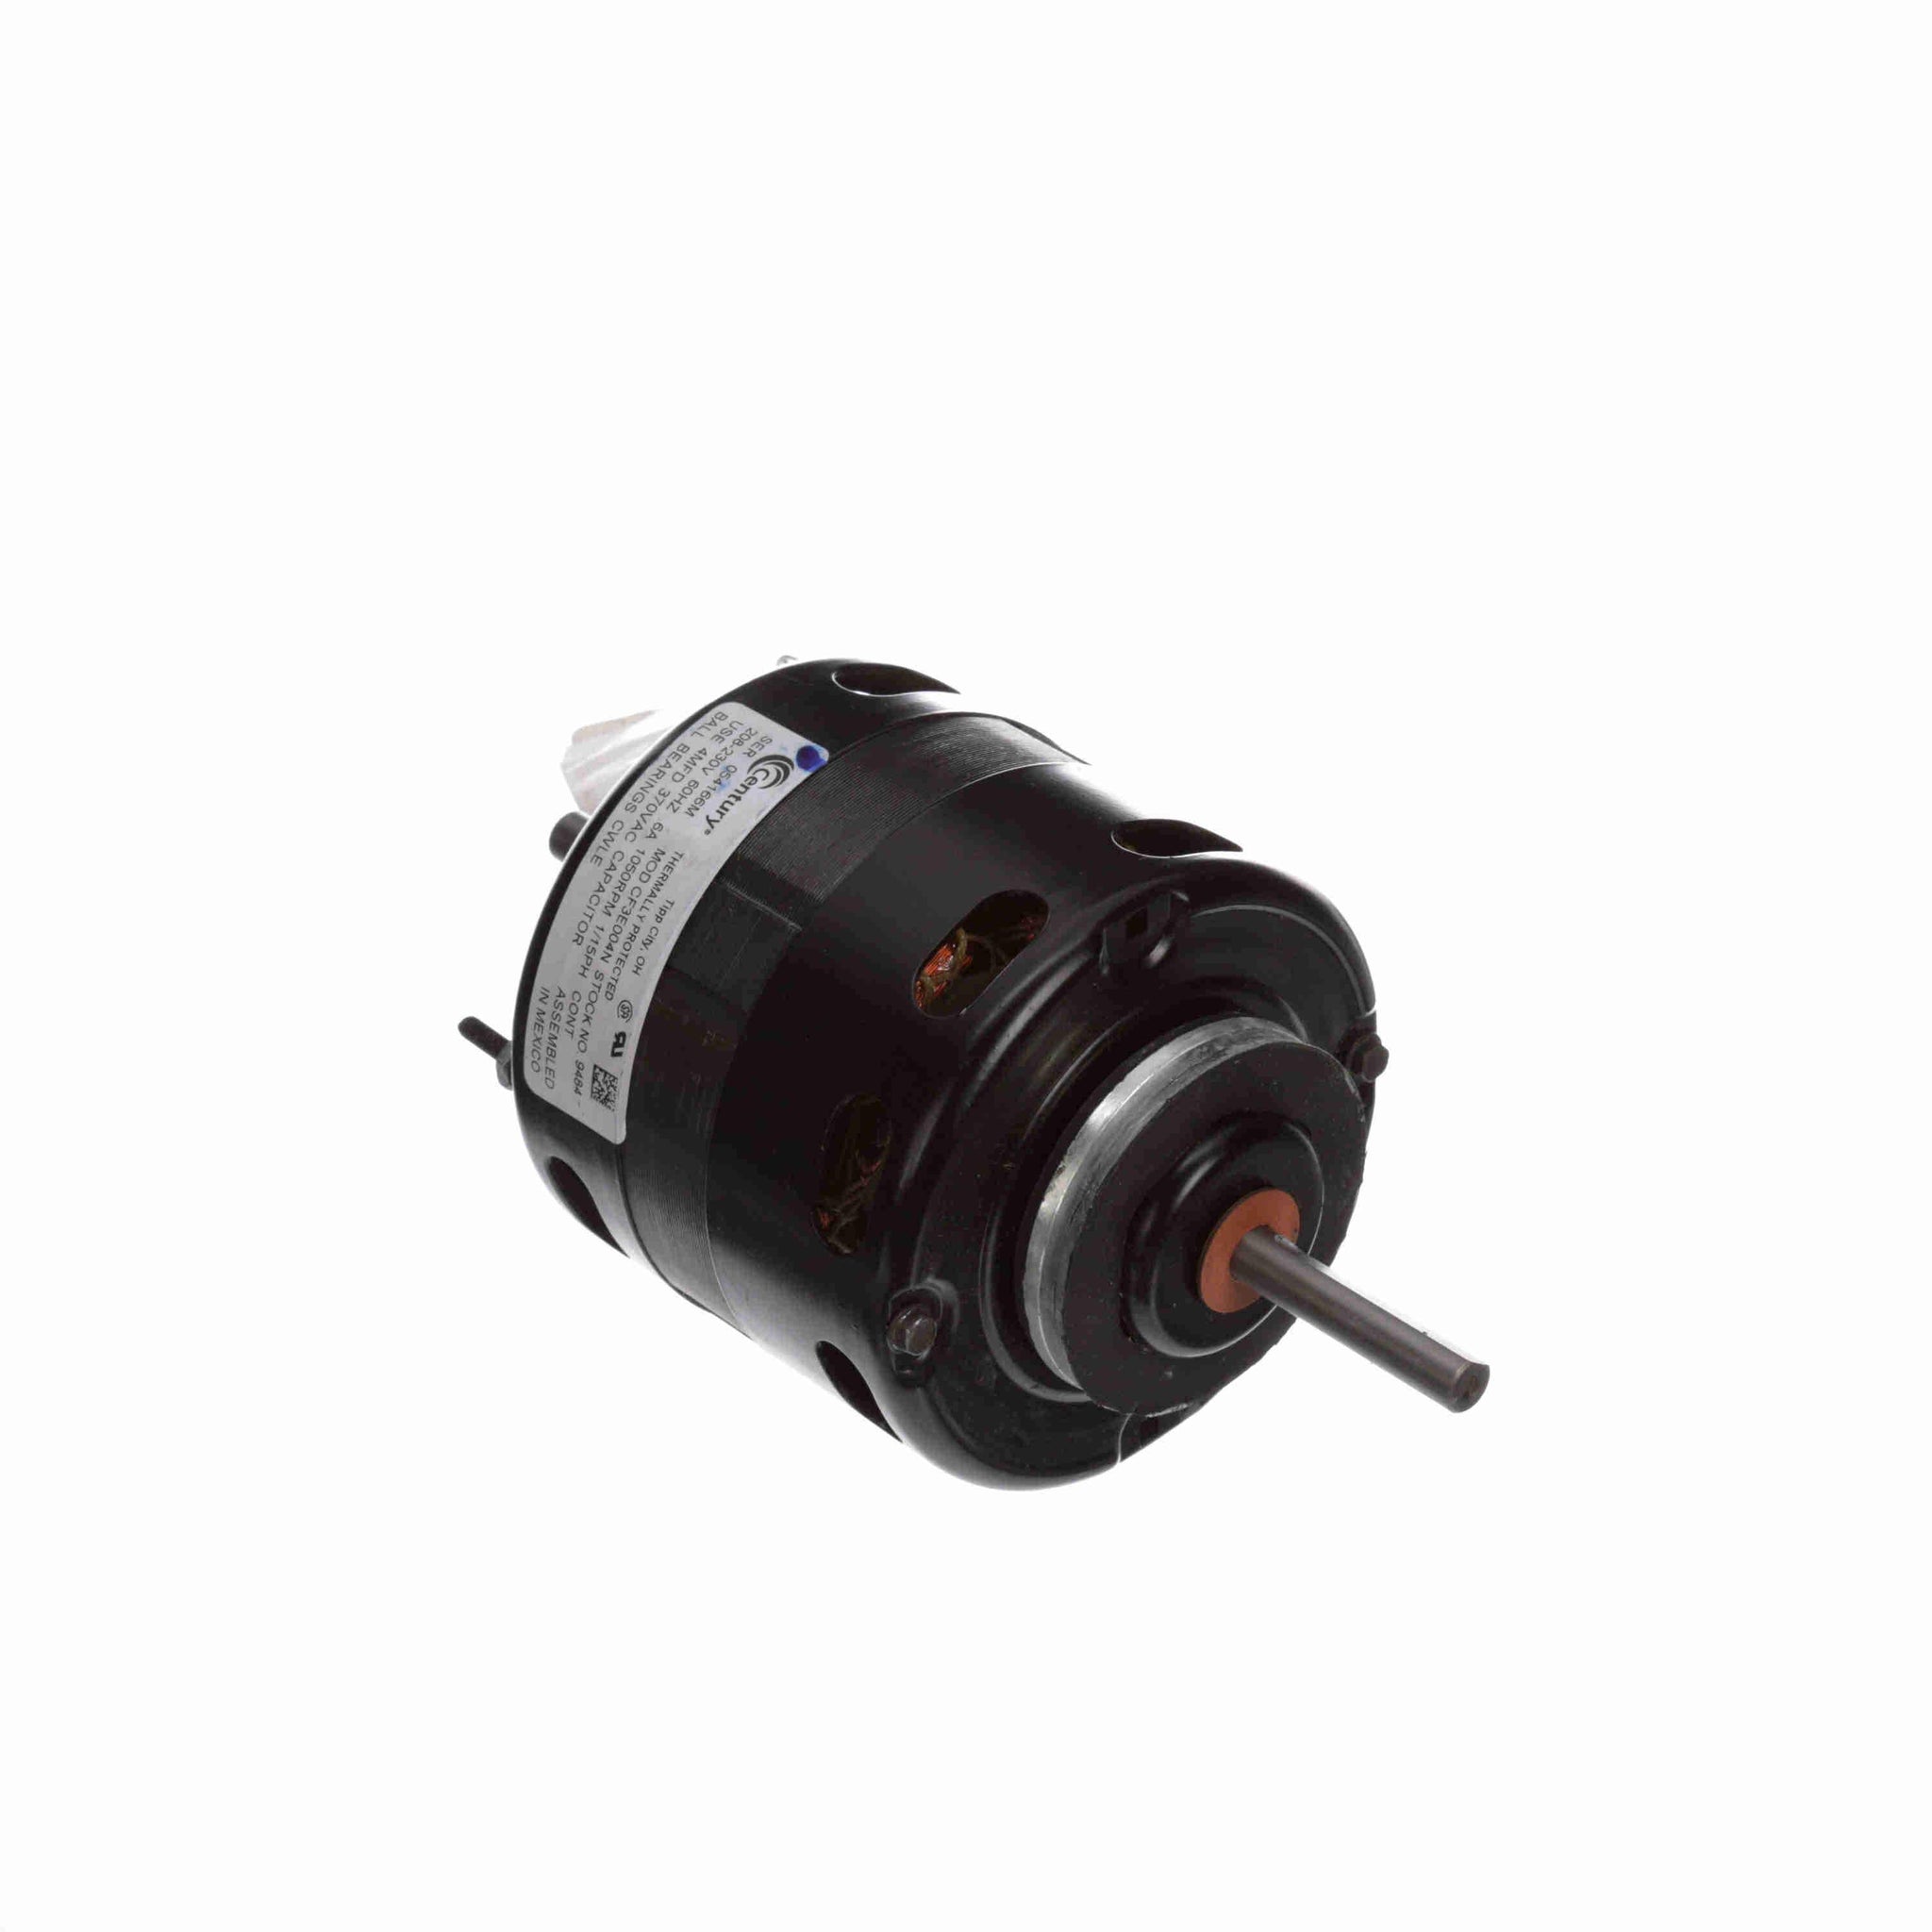 9484 -  1/15 HP OEM Replacement Motor, 1050 RPM, 208-230 Volts, 4.3